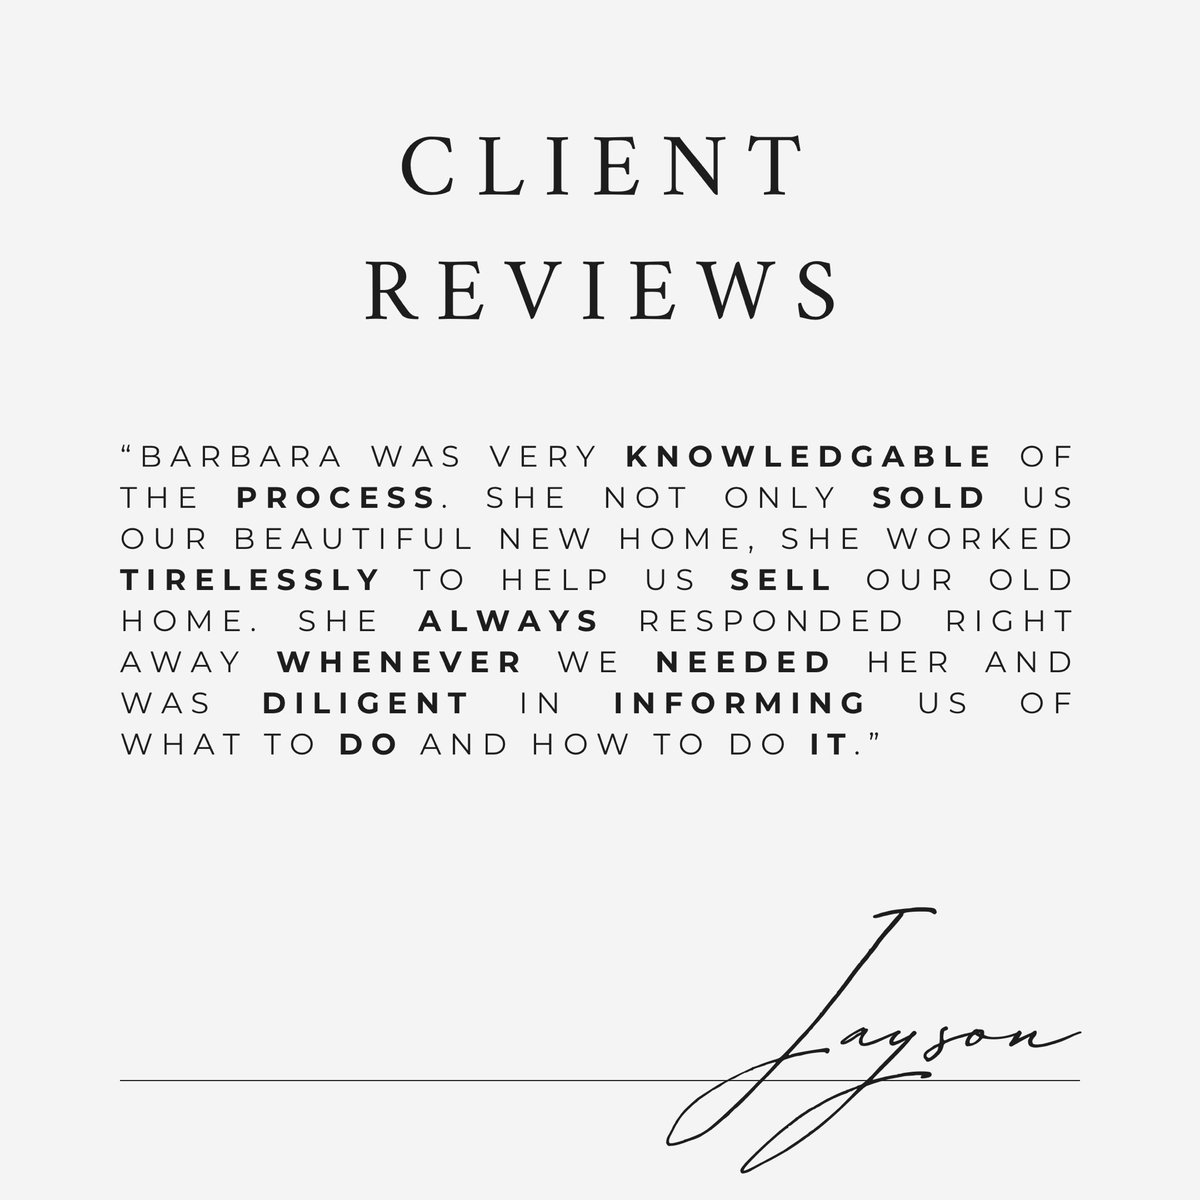 What a wonderful way to start the week! 📝 #ClientReviews 🌟🌟🌟🌟🌟

➡️ zillow.com/profile/Barbar…
.
.
.
.
#SoldByBarbara #CallBarbara #ILoveWhatIDo #ListenToYourBroker #ListWithMe #BuyWithMe #DouglasElliman #DouglasEllimanRealEstate #DE #EllimanAgents #EllimanLI #LongIsland